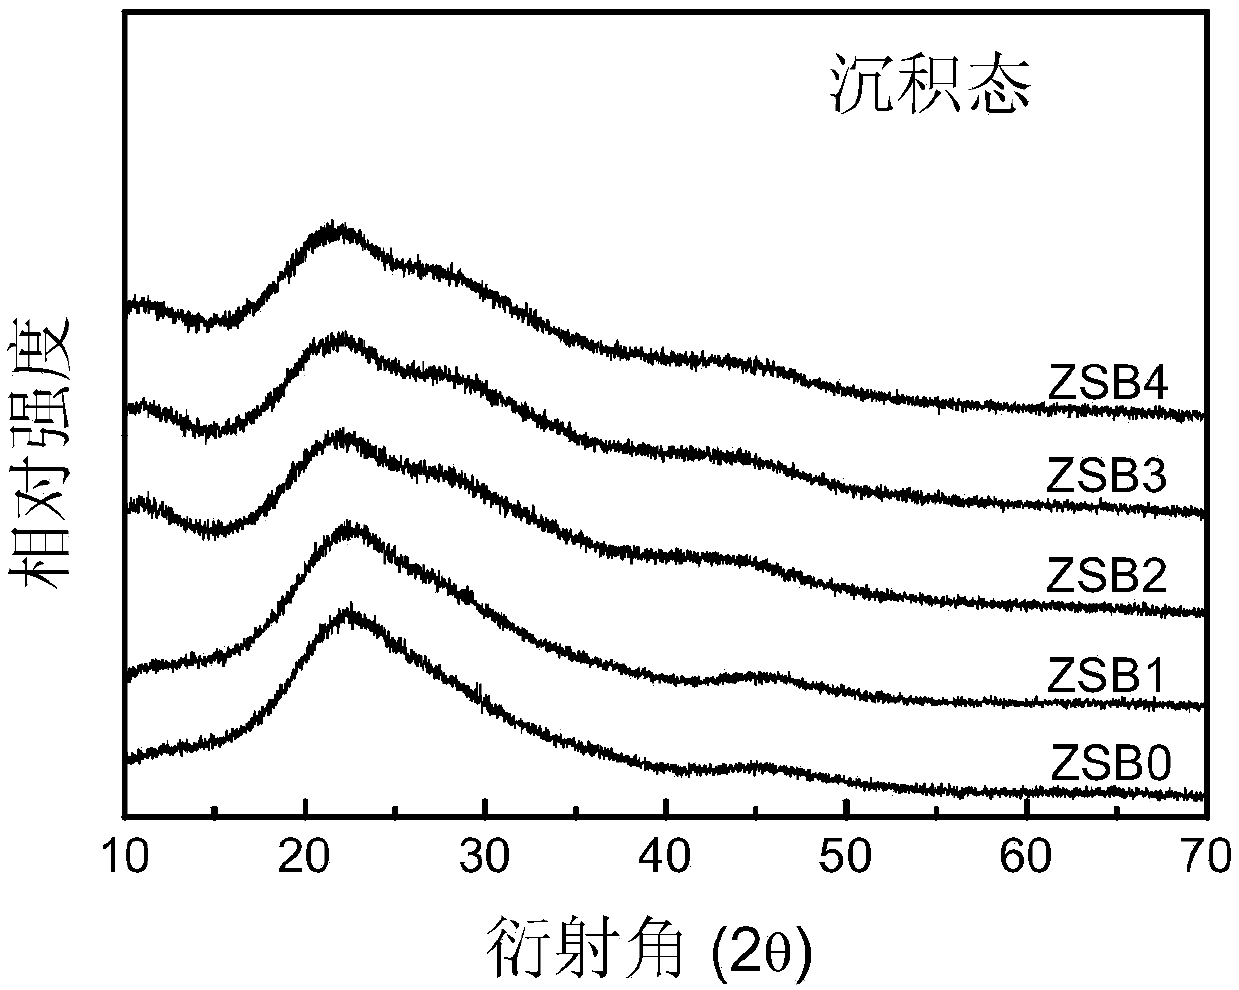 Zn-Sb-Bi thin film material used for multi-state phase change memory, and preparation method of thin film material